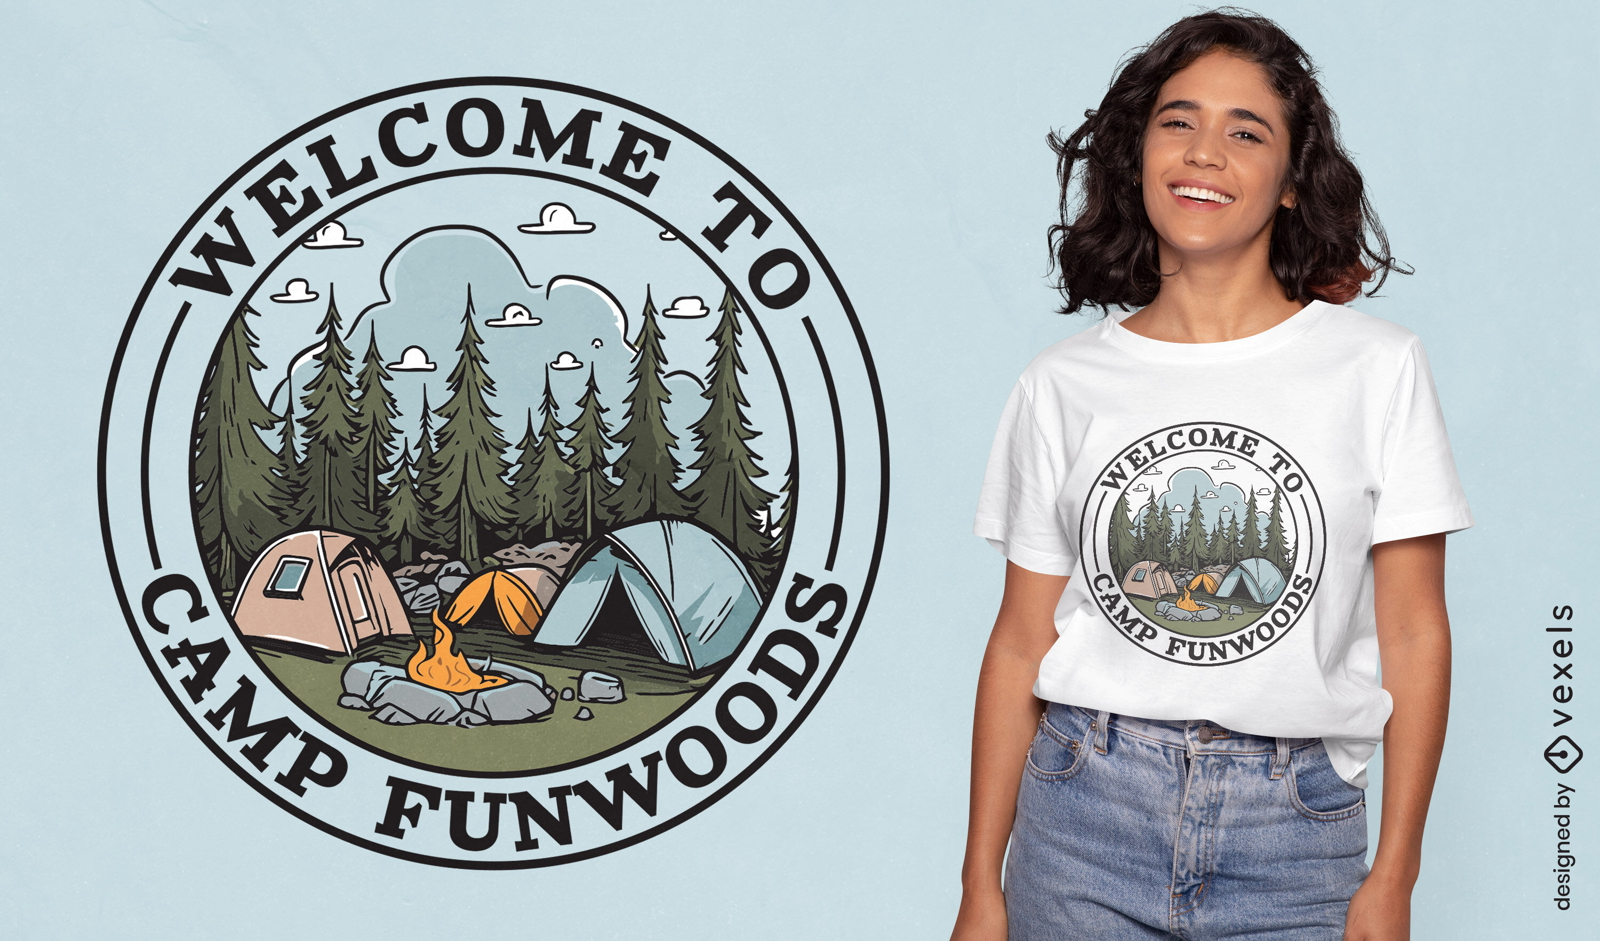 Camping welcome badge t-shirt design